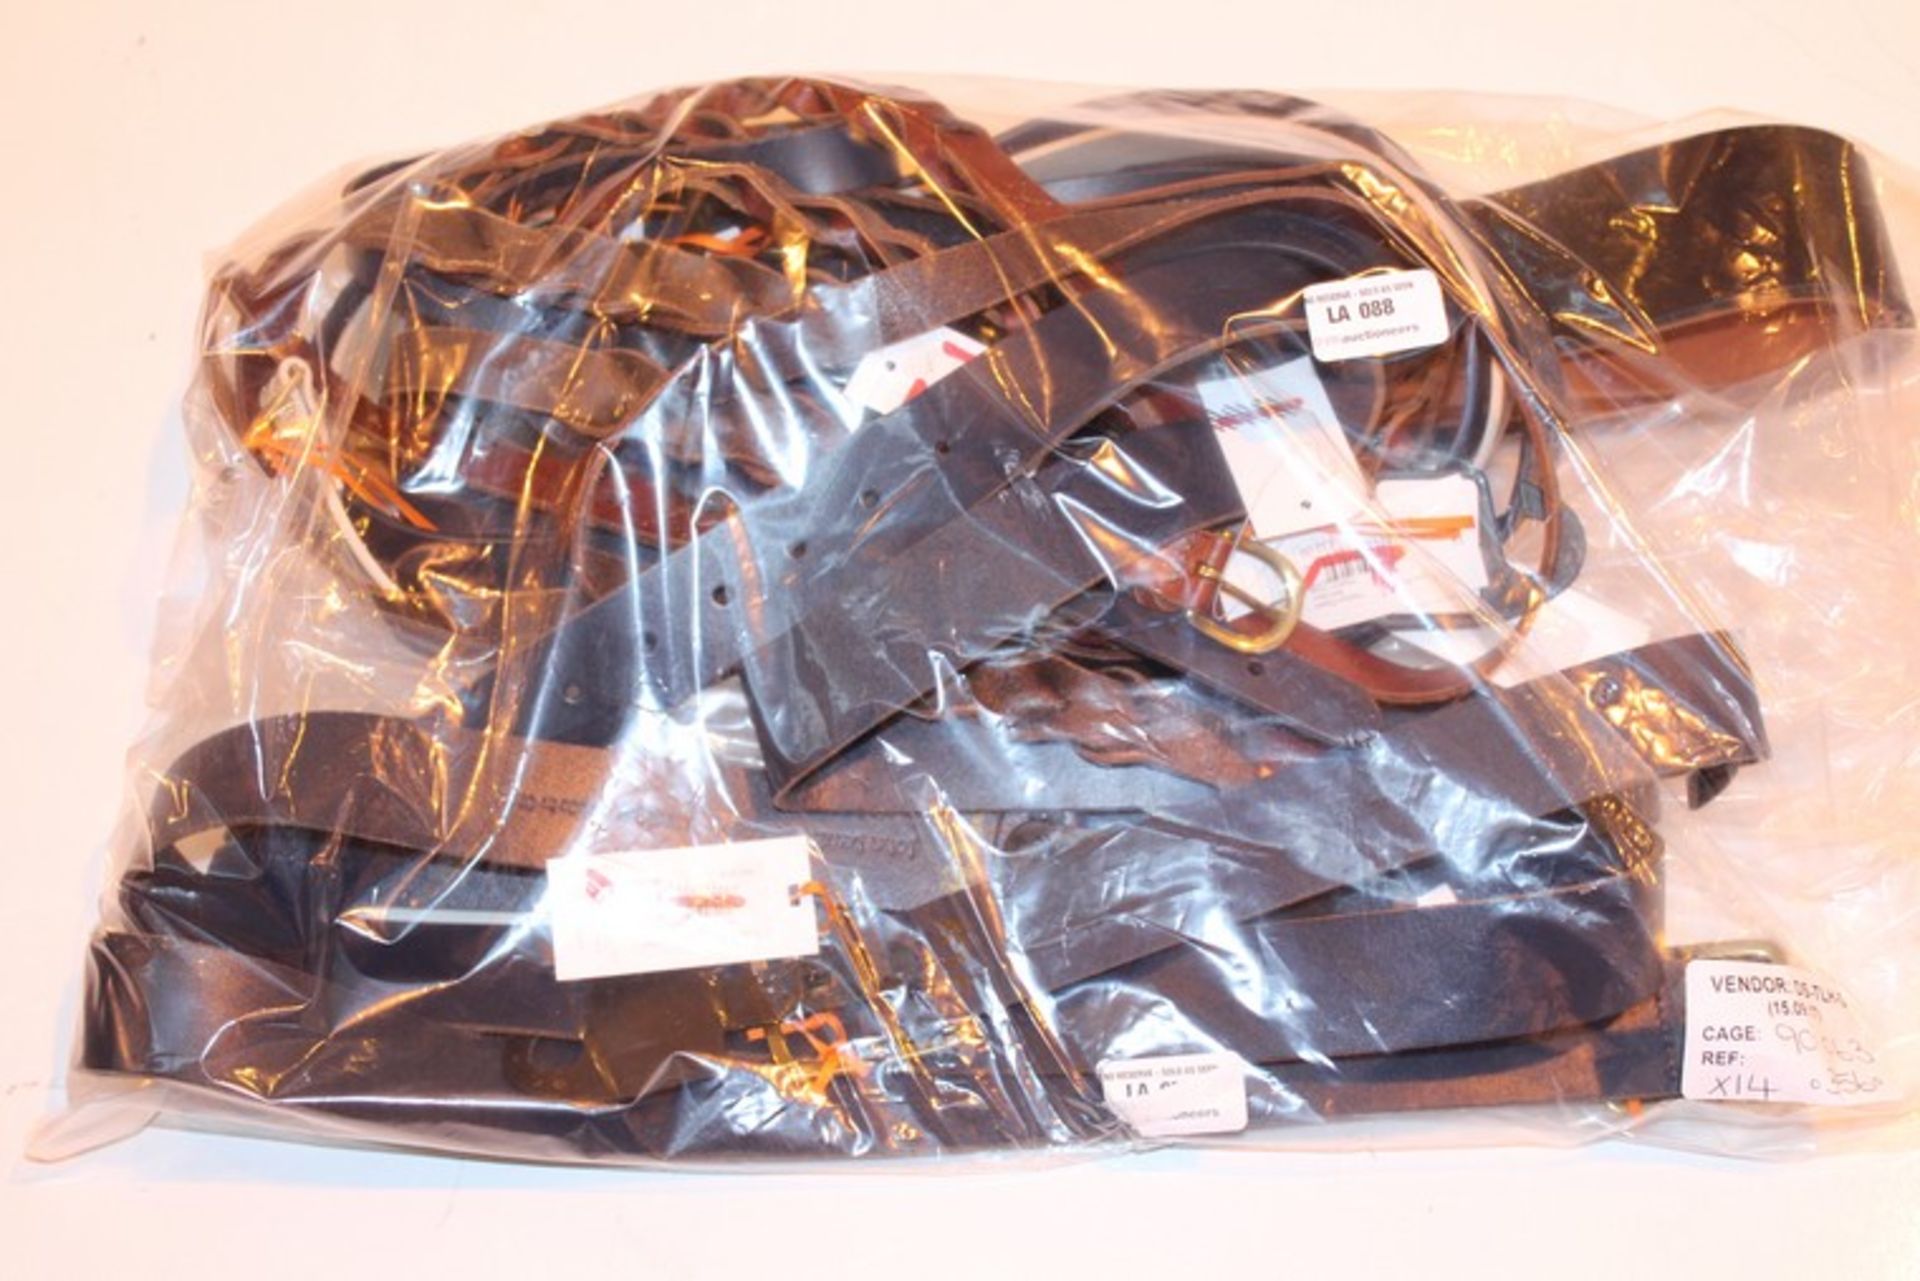 14 x ASSORTED MENS BELTS IN A BAG COMBINED RRP £350 (15.09.17) (19.063) *PLEASE NOTE THAT THE BID